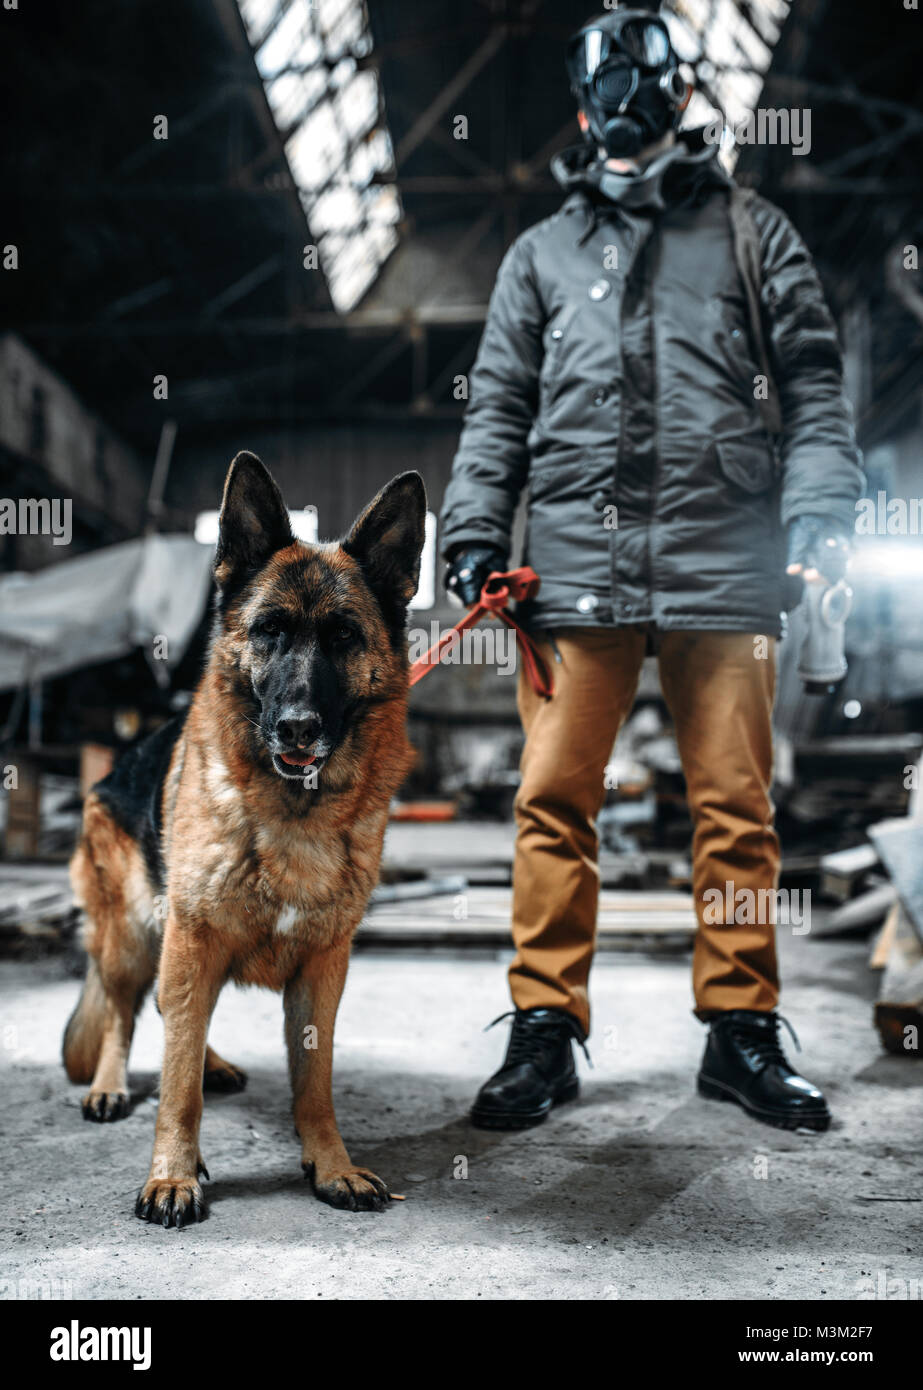 Stalker soldier in gas mask and dog in radioactive zone, friends in post apocalyptic world. Post-apocalypse lifestyle on ruins, doomsday, judgment day Stock Photo